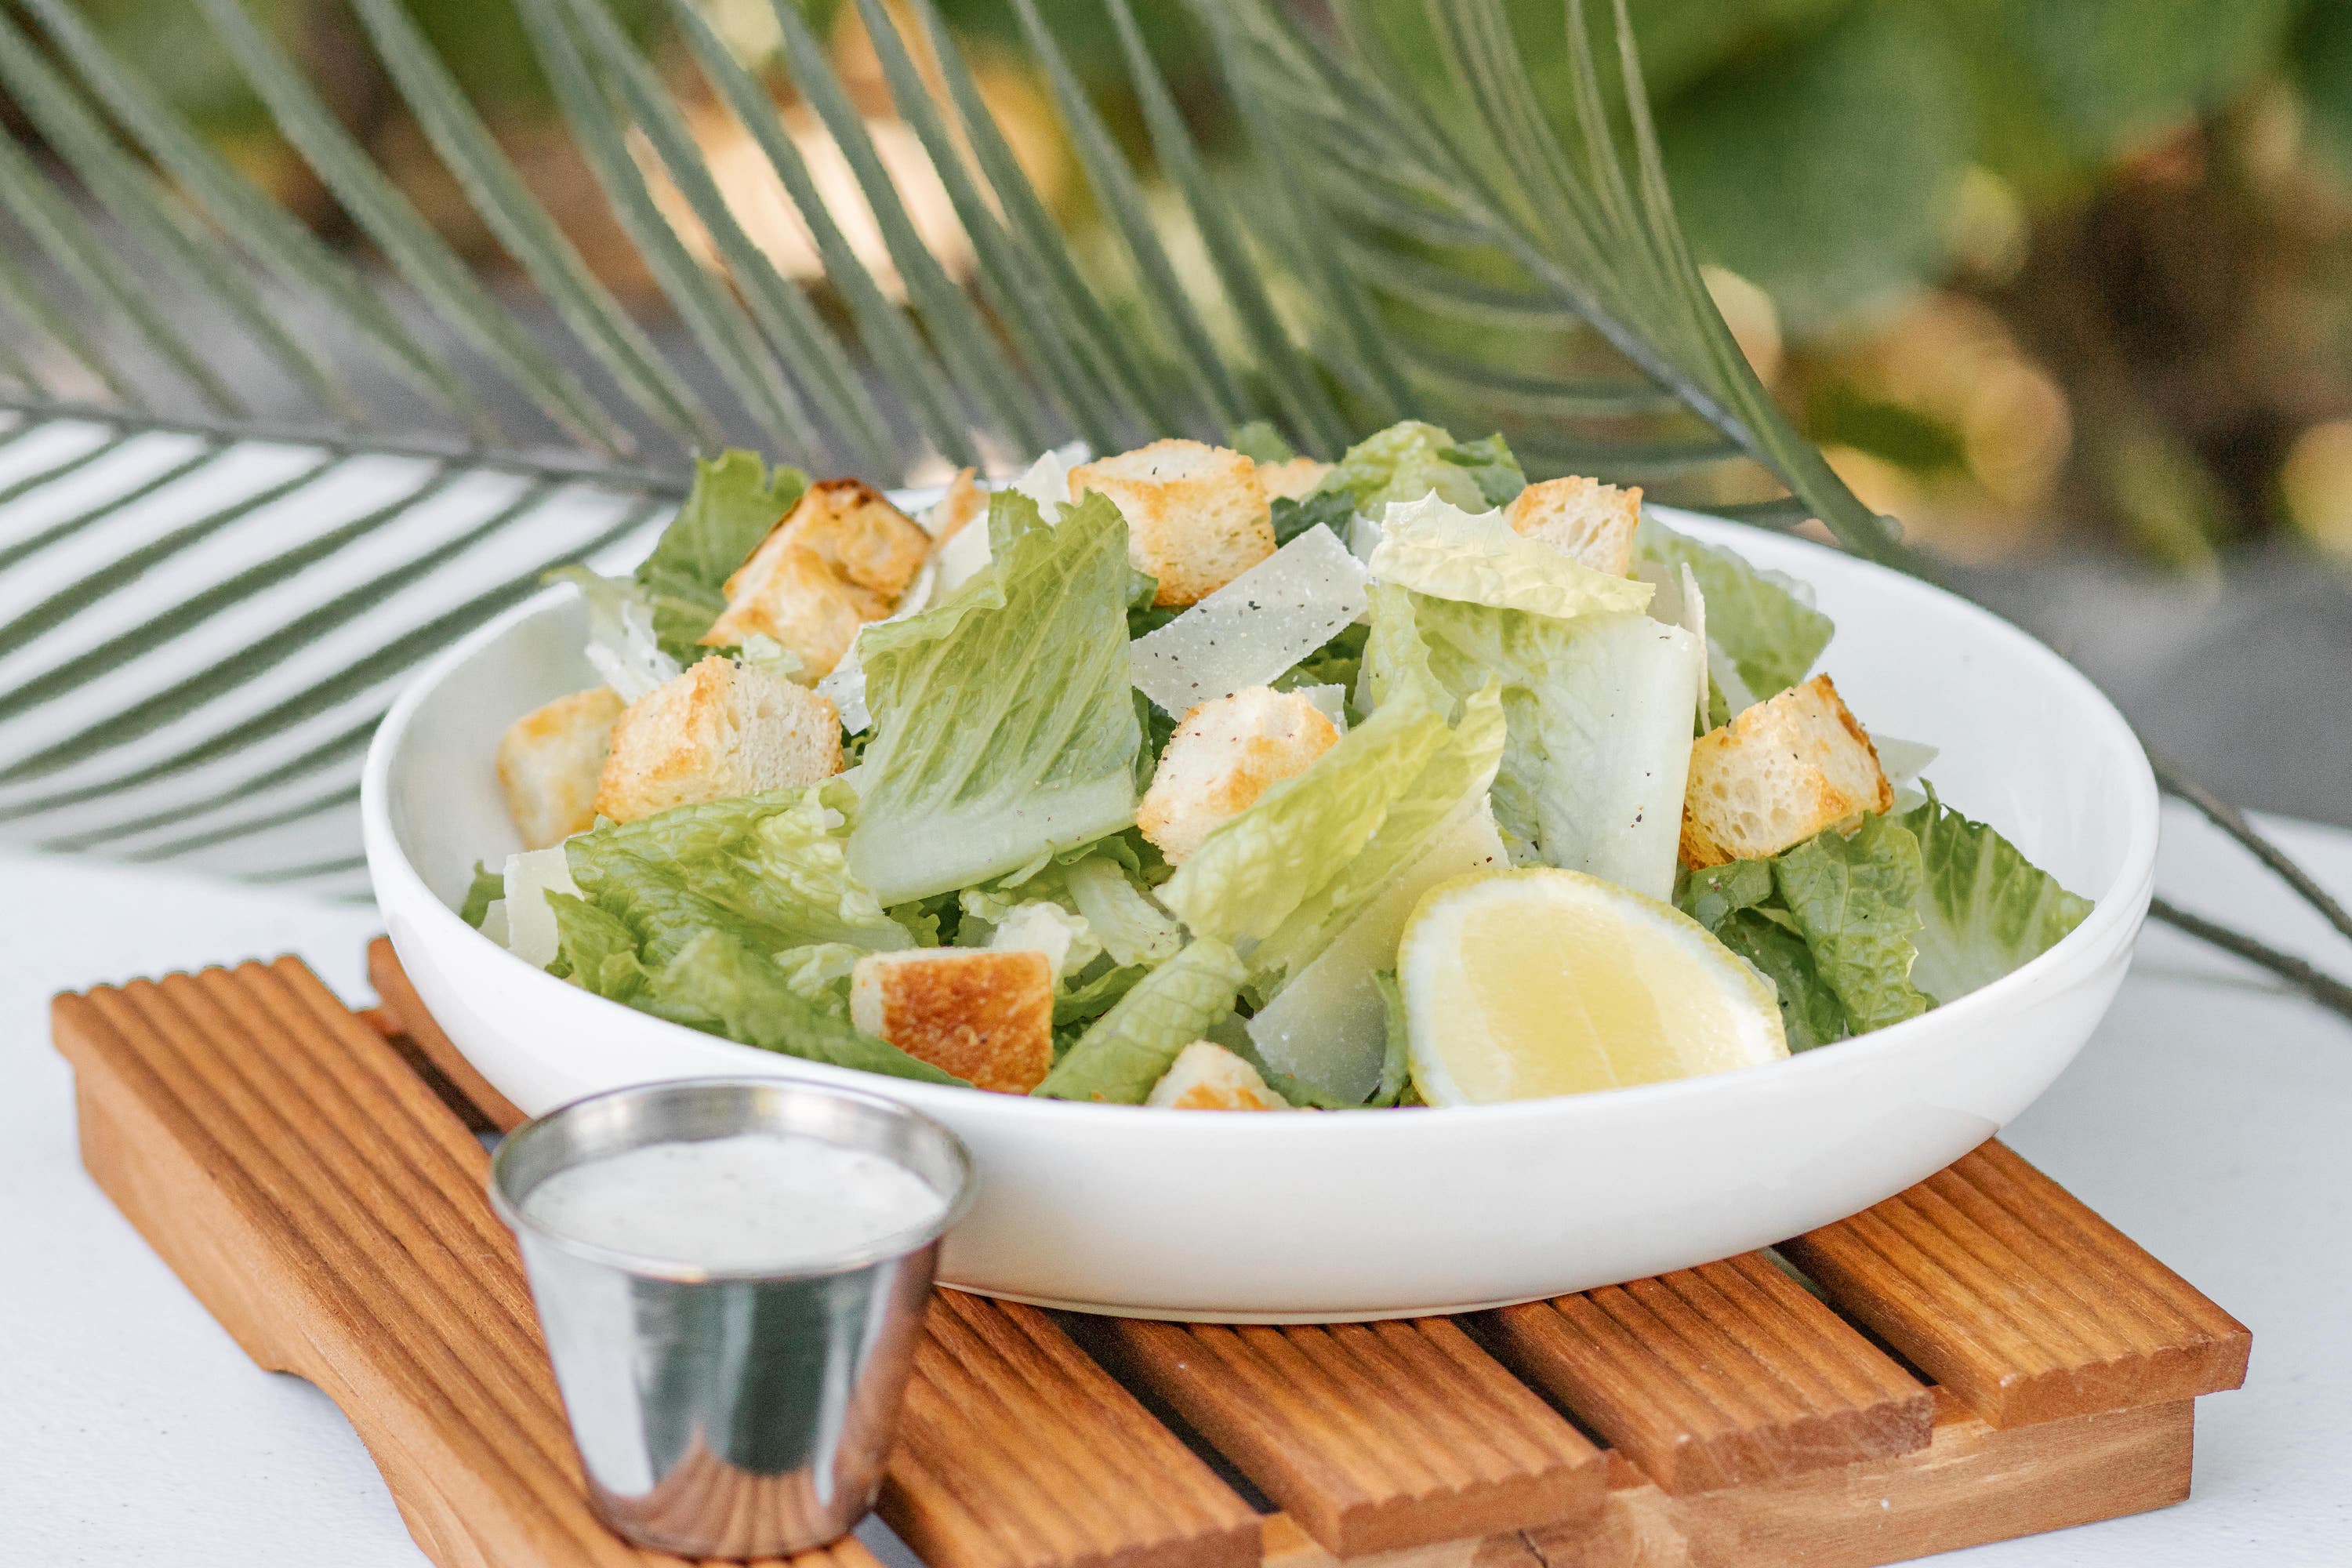 Caesar Salad with romaine lettuce, parmesan shavings, lemon, housemade sourdough croutons, and dressing on the side